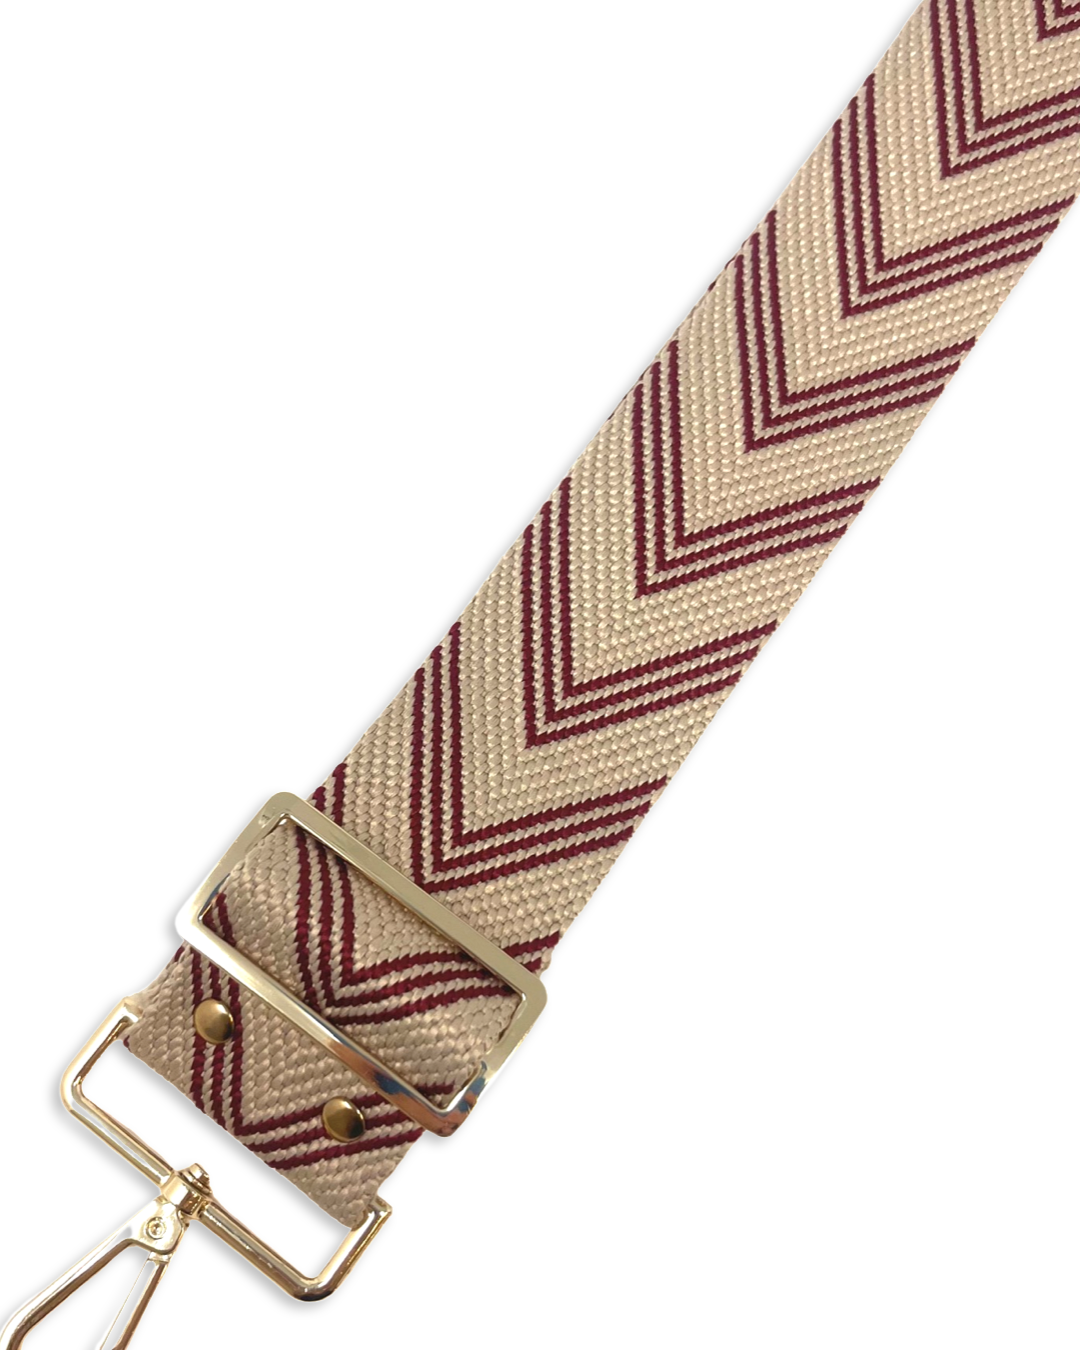 Chevy Strap in Natural with Burgandy